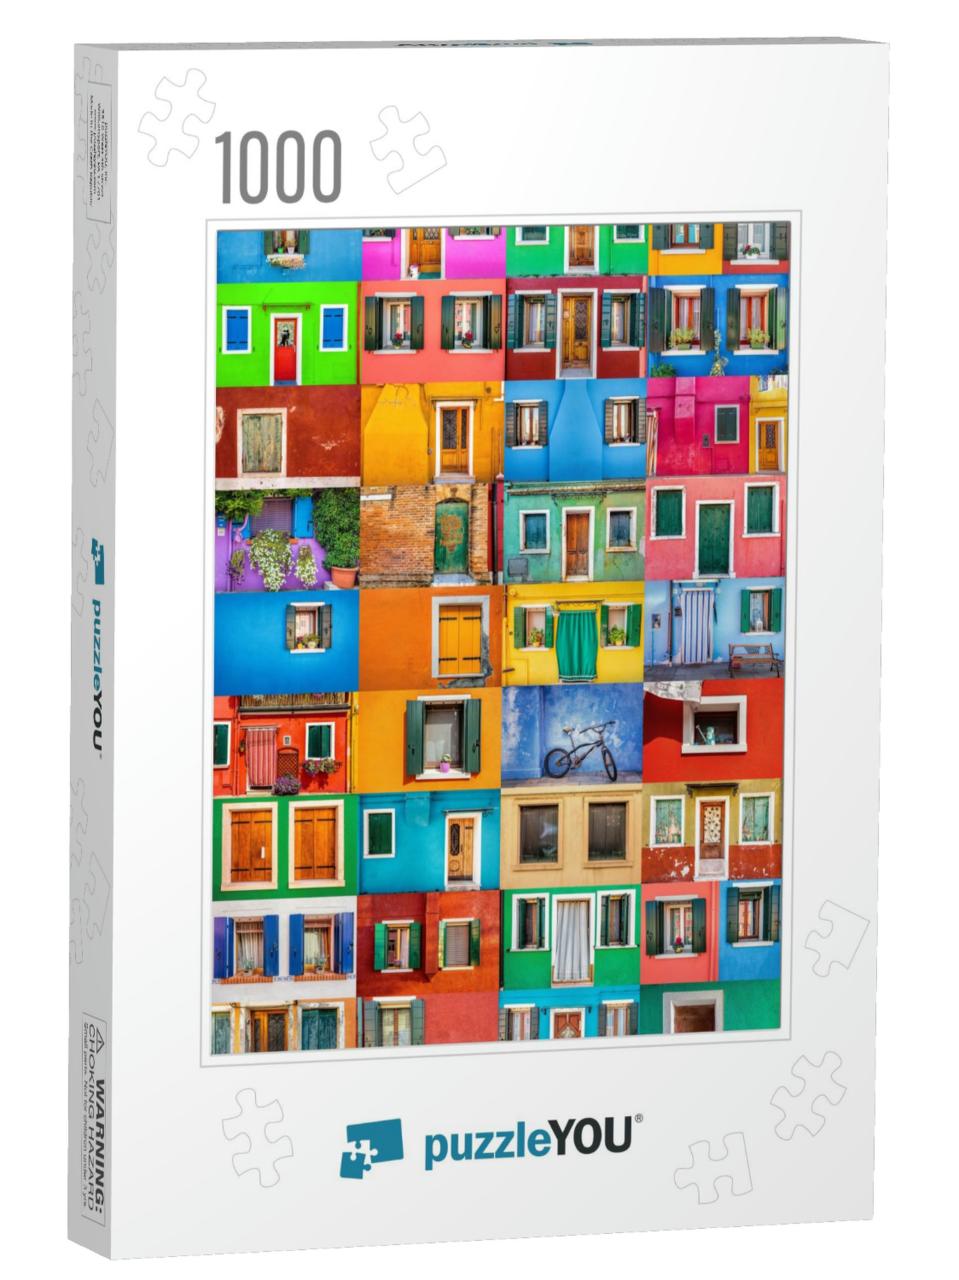 Collage Set of 36 Horizontal Colorful Windows & Doors in... Jigsaw Puzzle with 1000 pieces